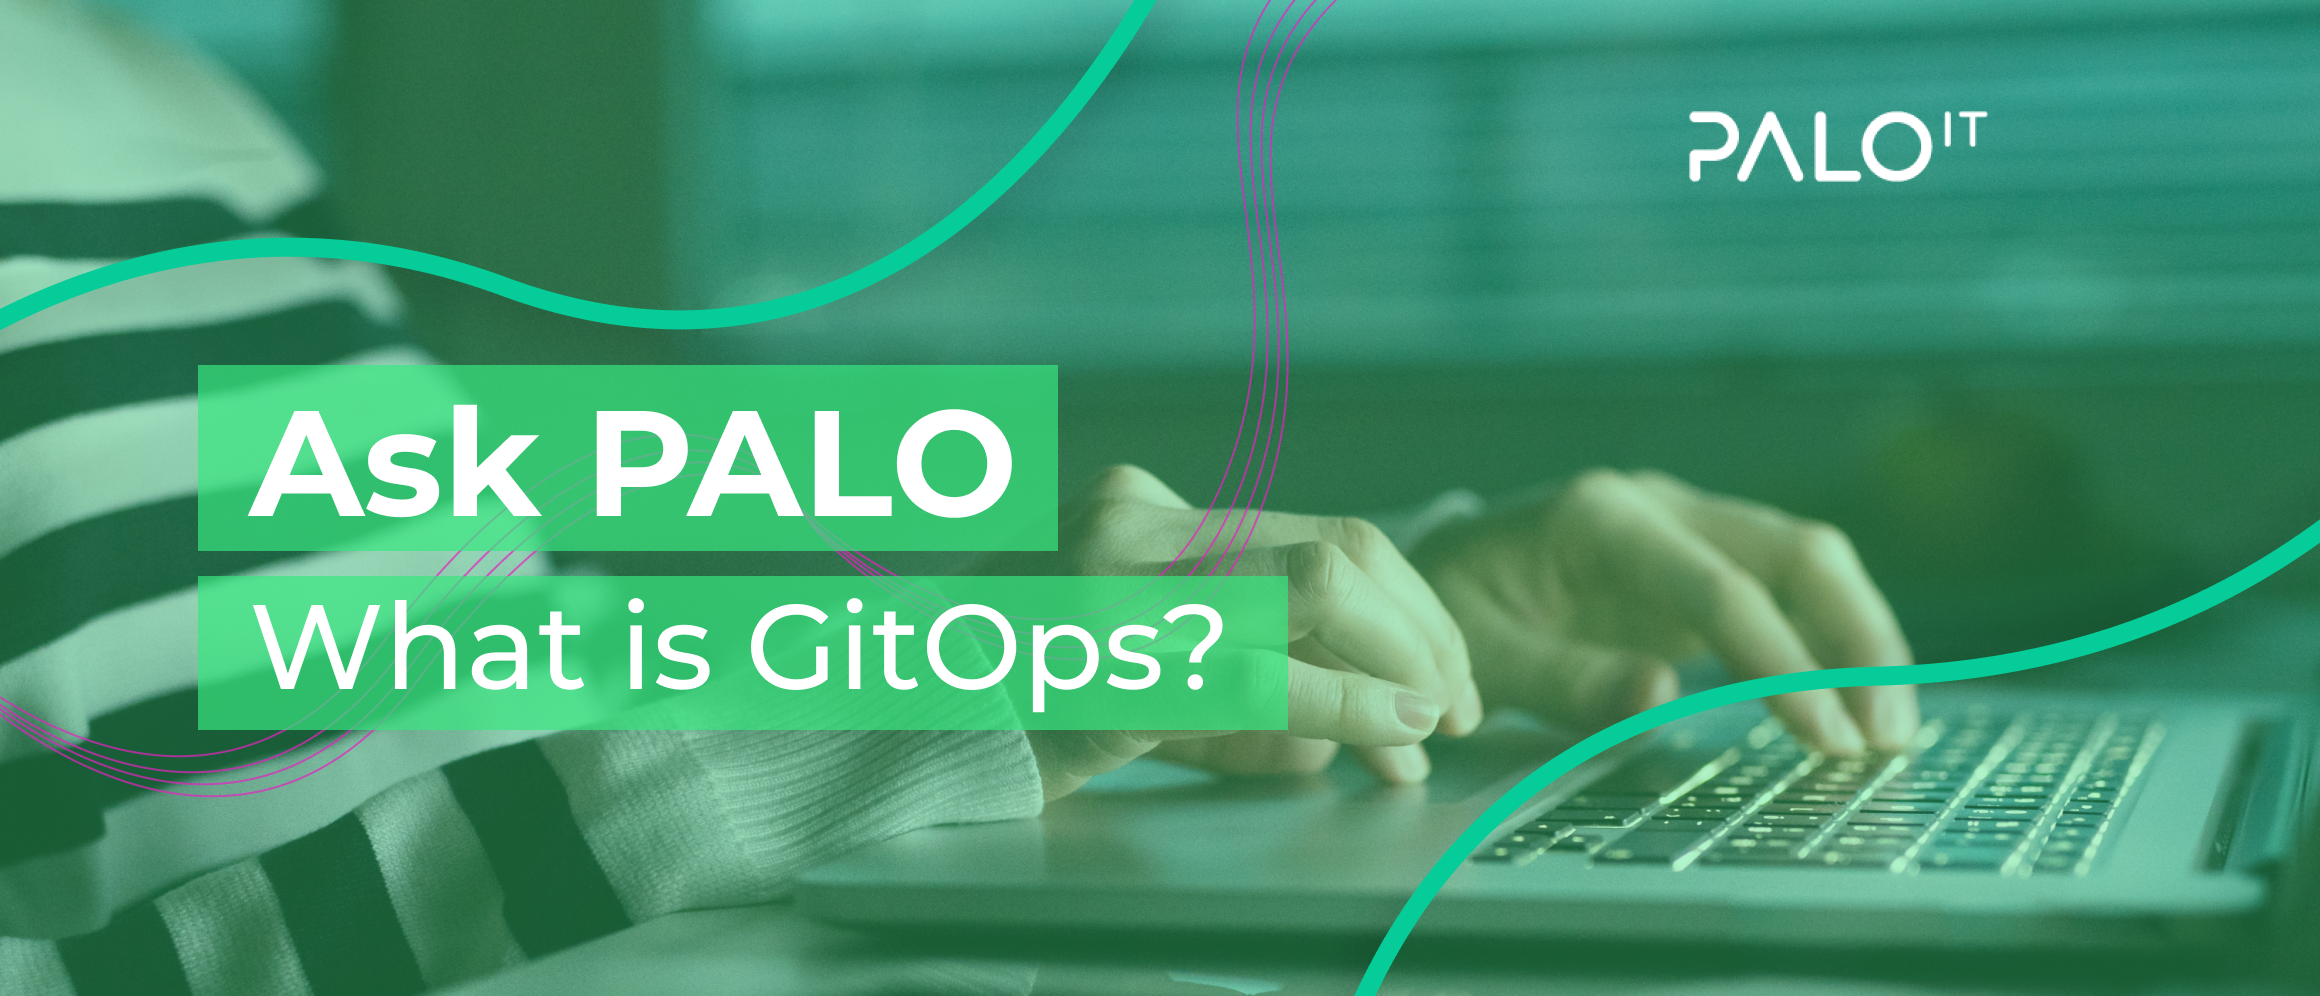 Ask PALO : What is GitOps?